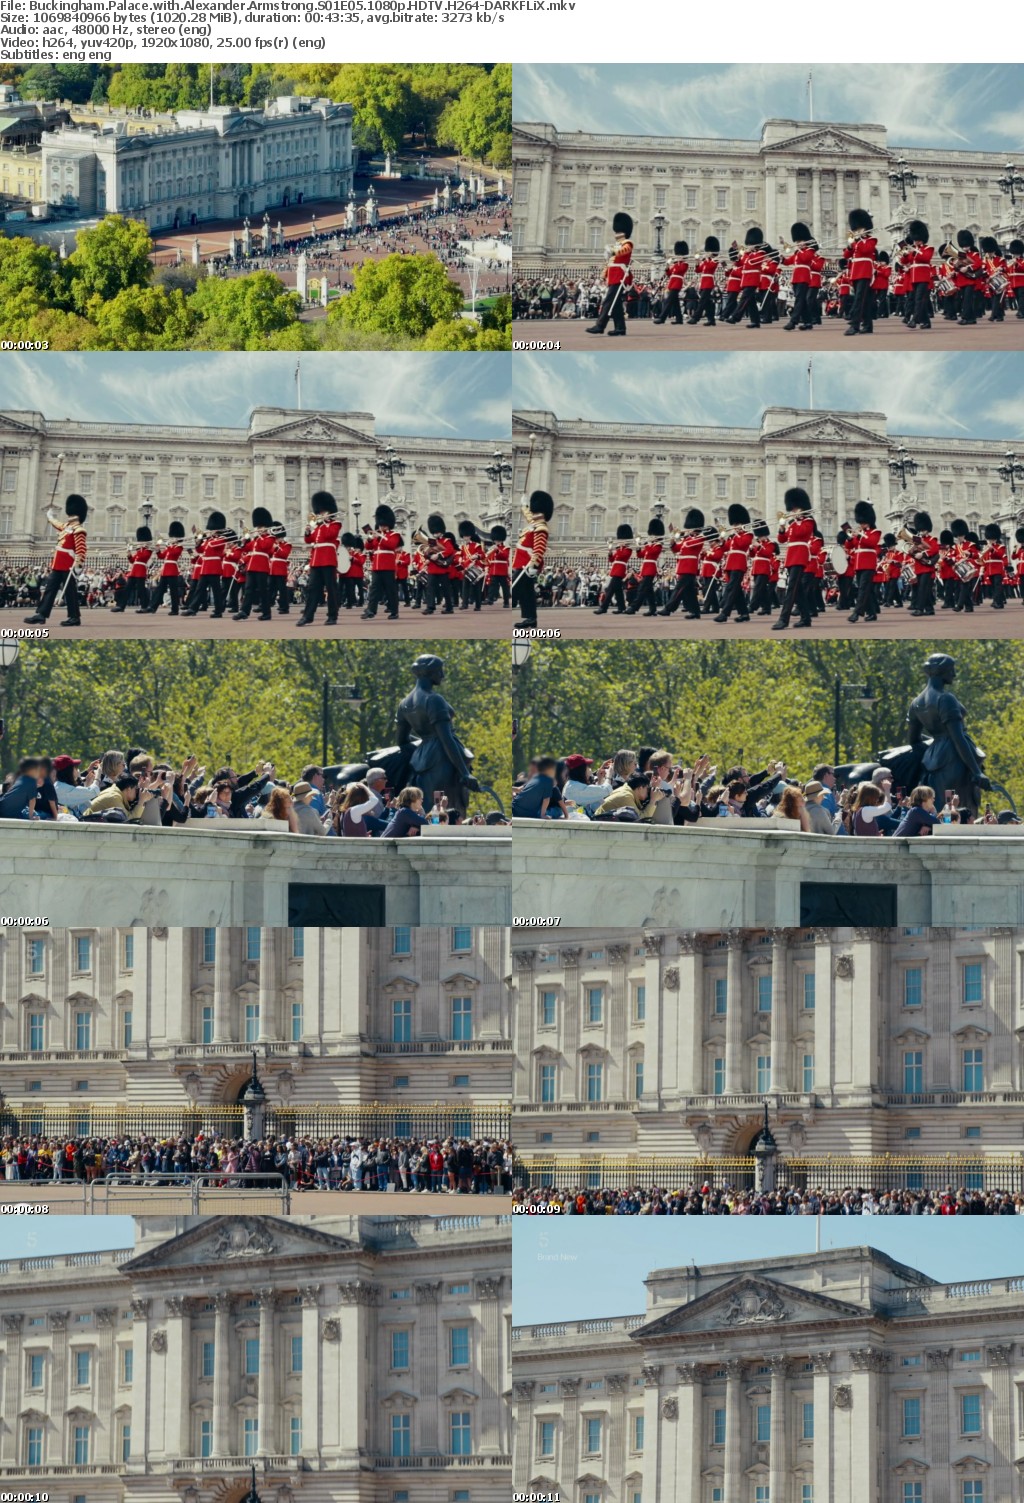 Buckingham Palace with Alexander Armstrong S01E05 1080p HDTV H264-DARKFLiX